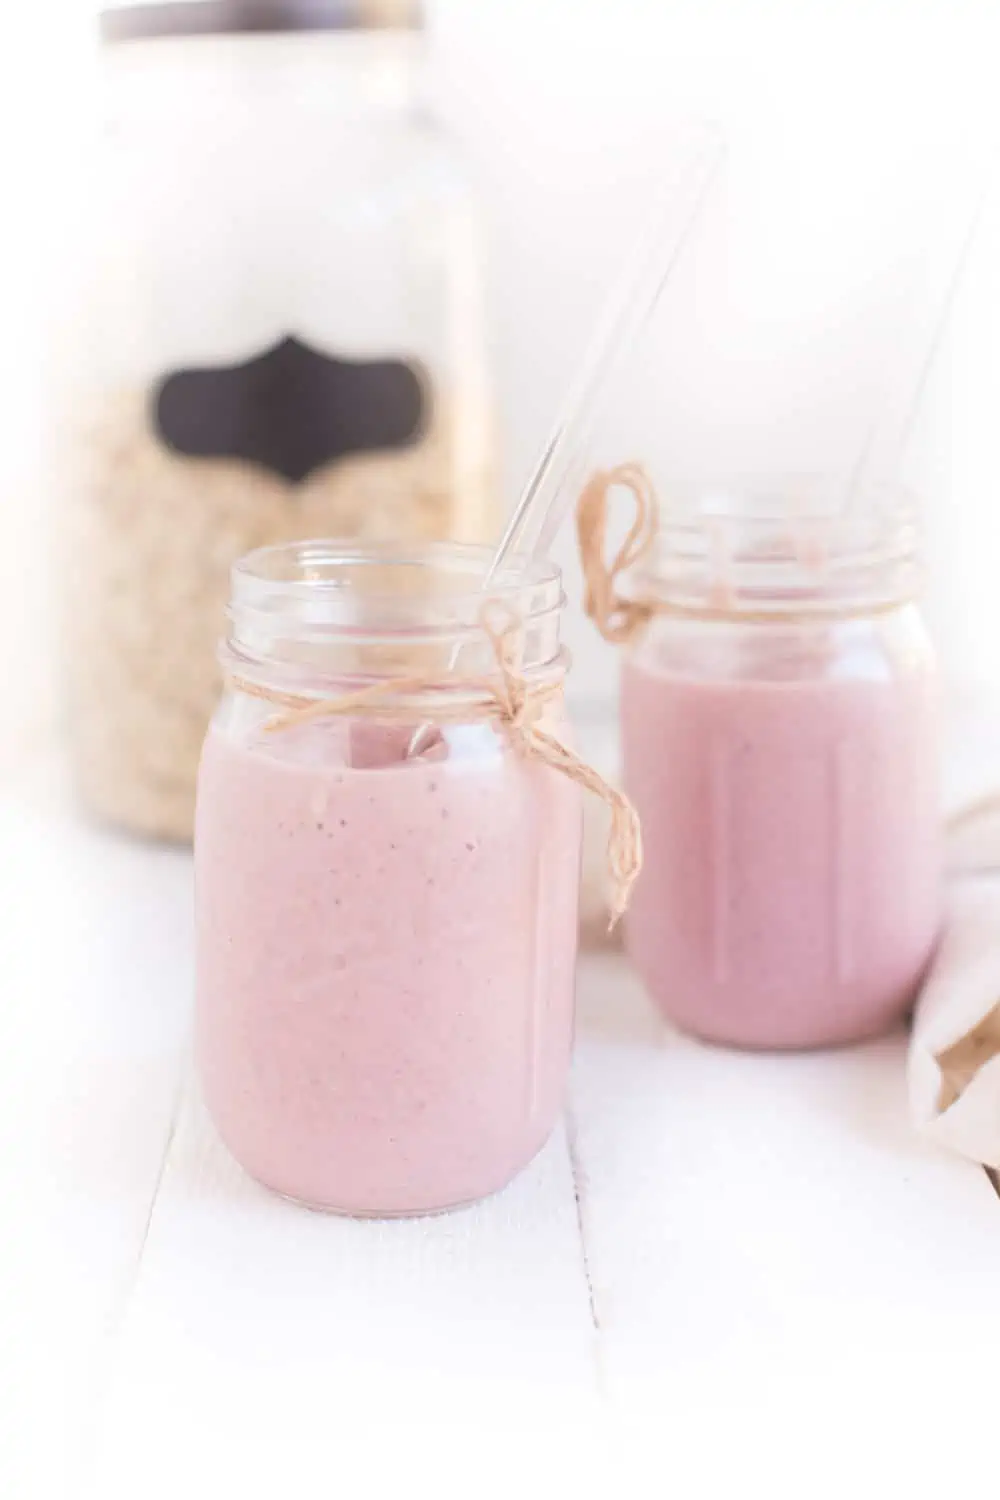 Two Mason Jars filled with this almond milk strawberry smoothie and a container of Oats